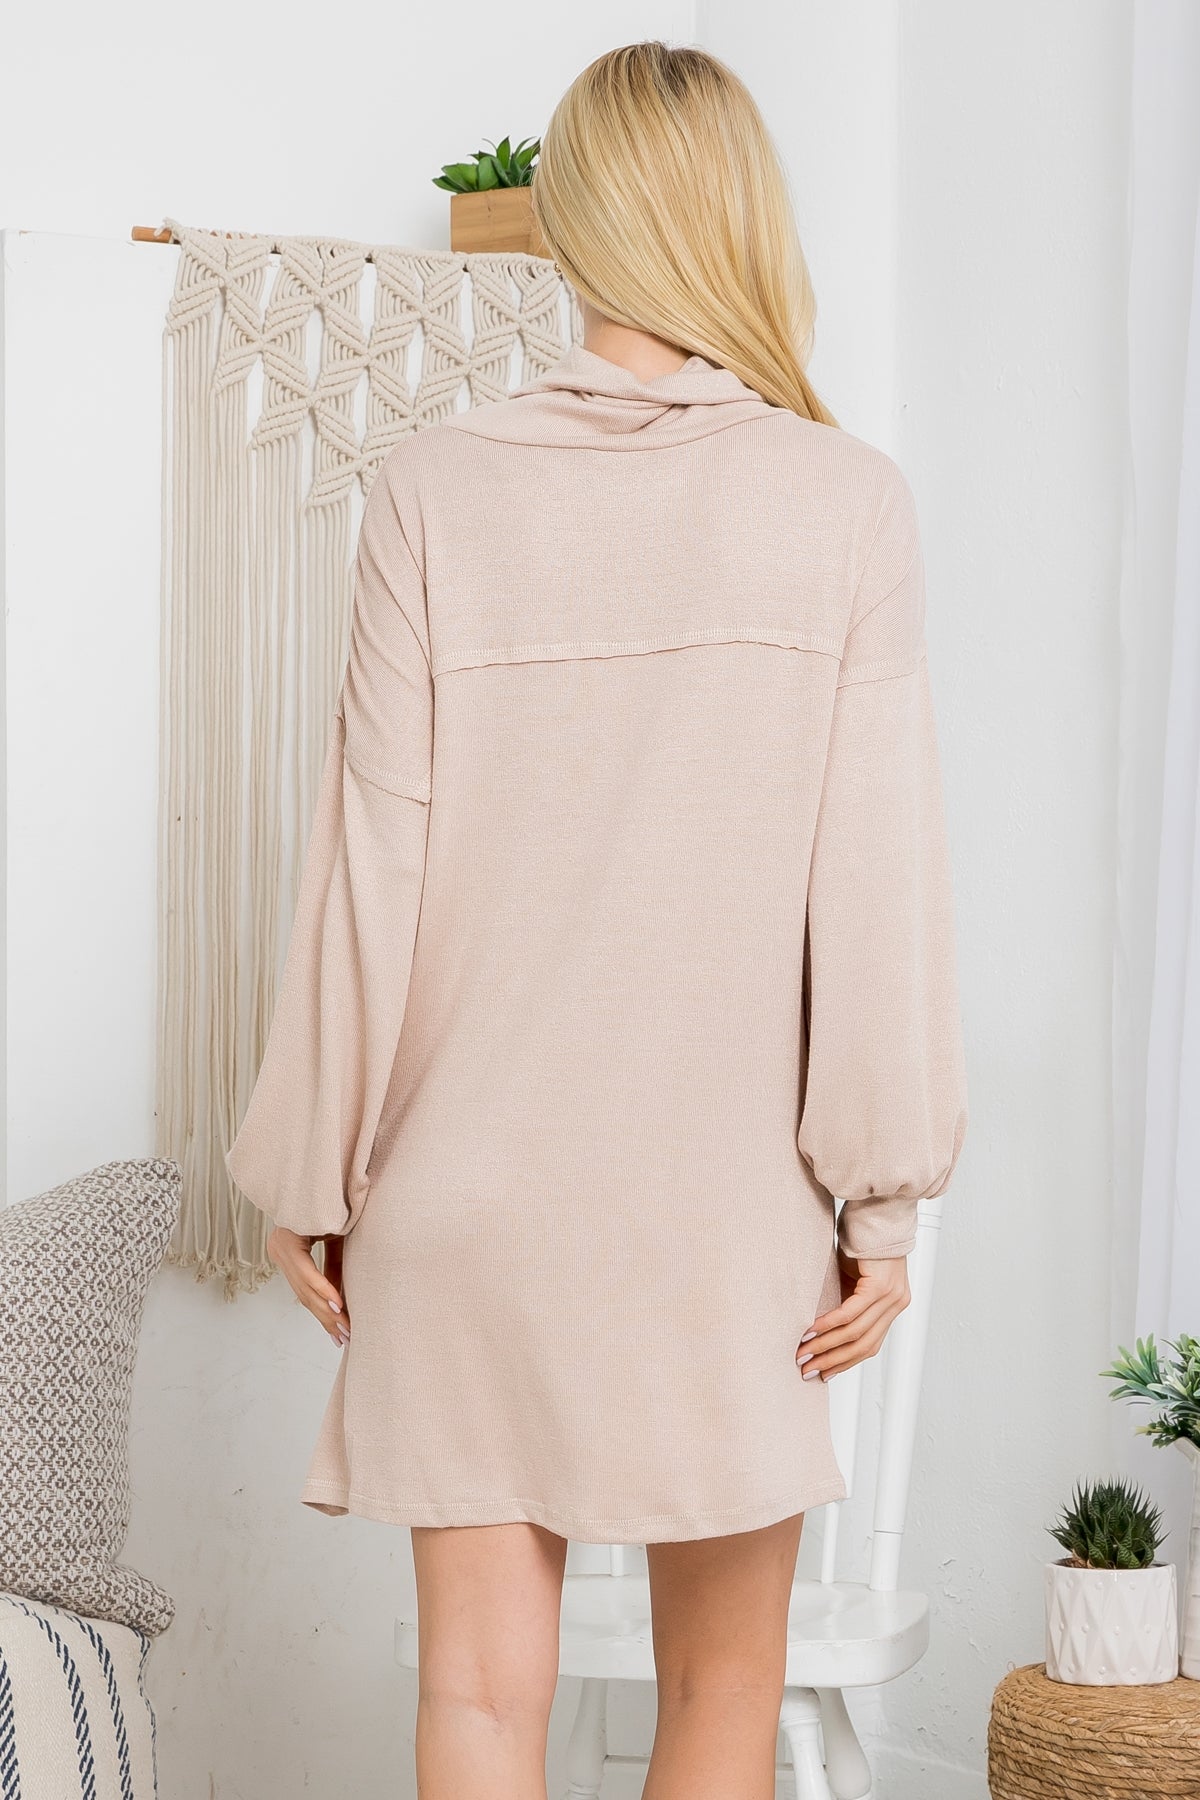 BEIGE COWL NECK WITH BOTTOM SIDE POCKET CUFFED LONG SLEEVE BABYDOLL DRESS (NOW $5.75 ONLY!)